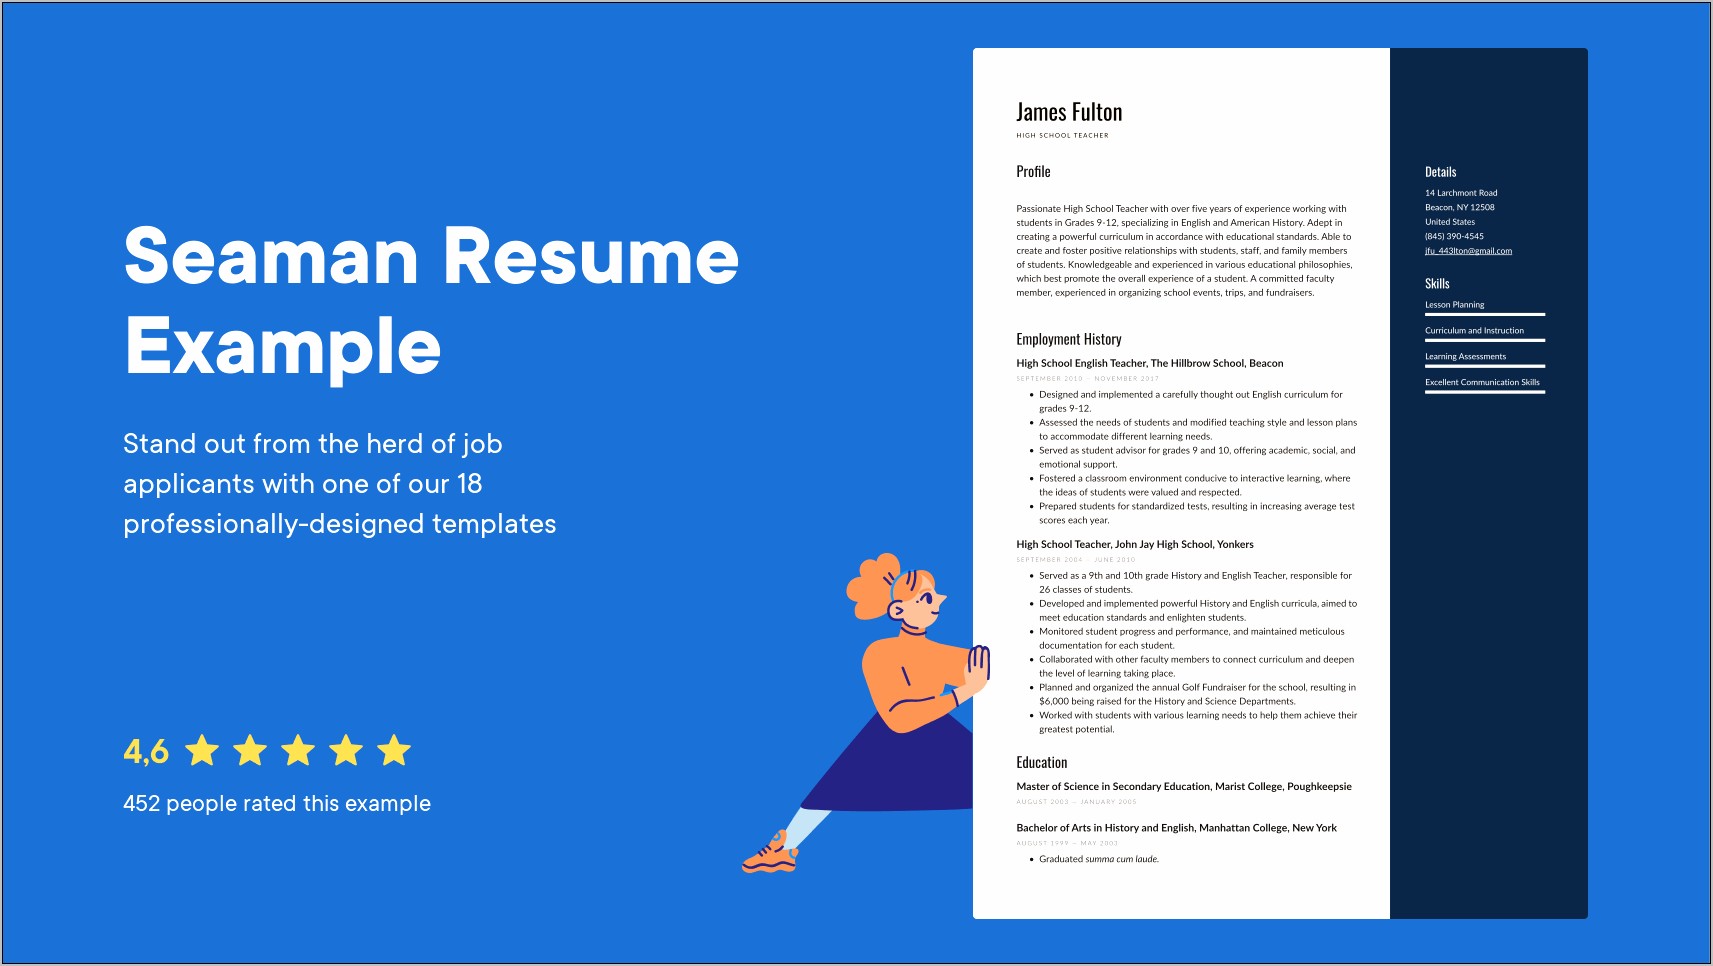 Resume Examples For Marines Applying For Jobs